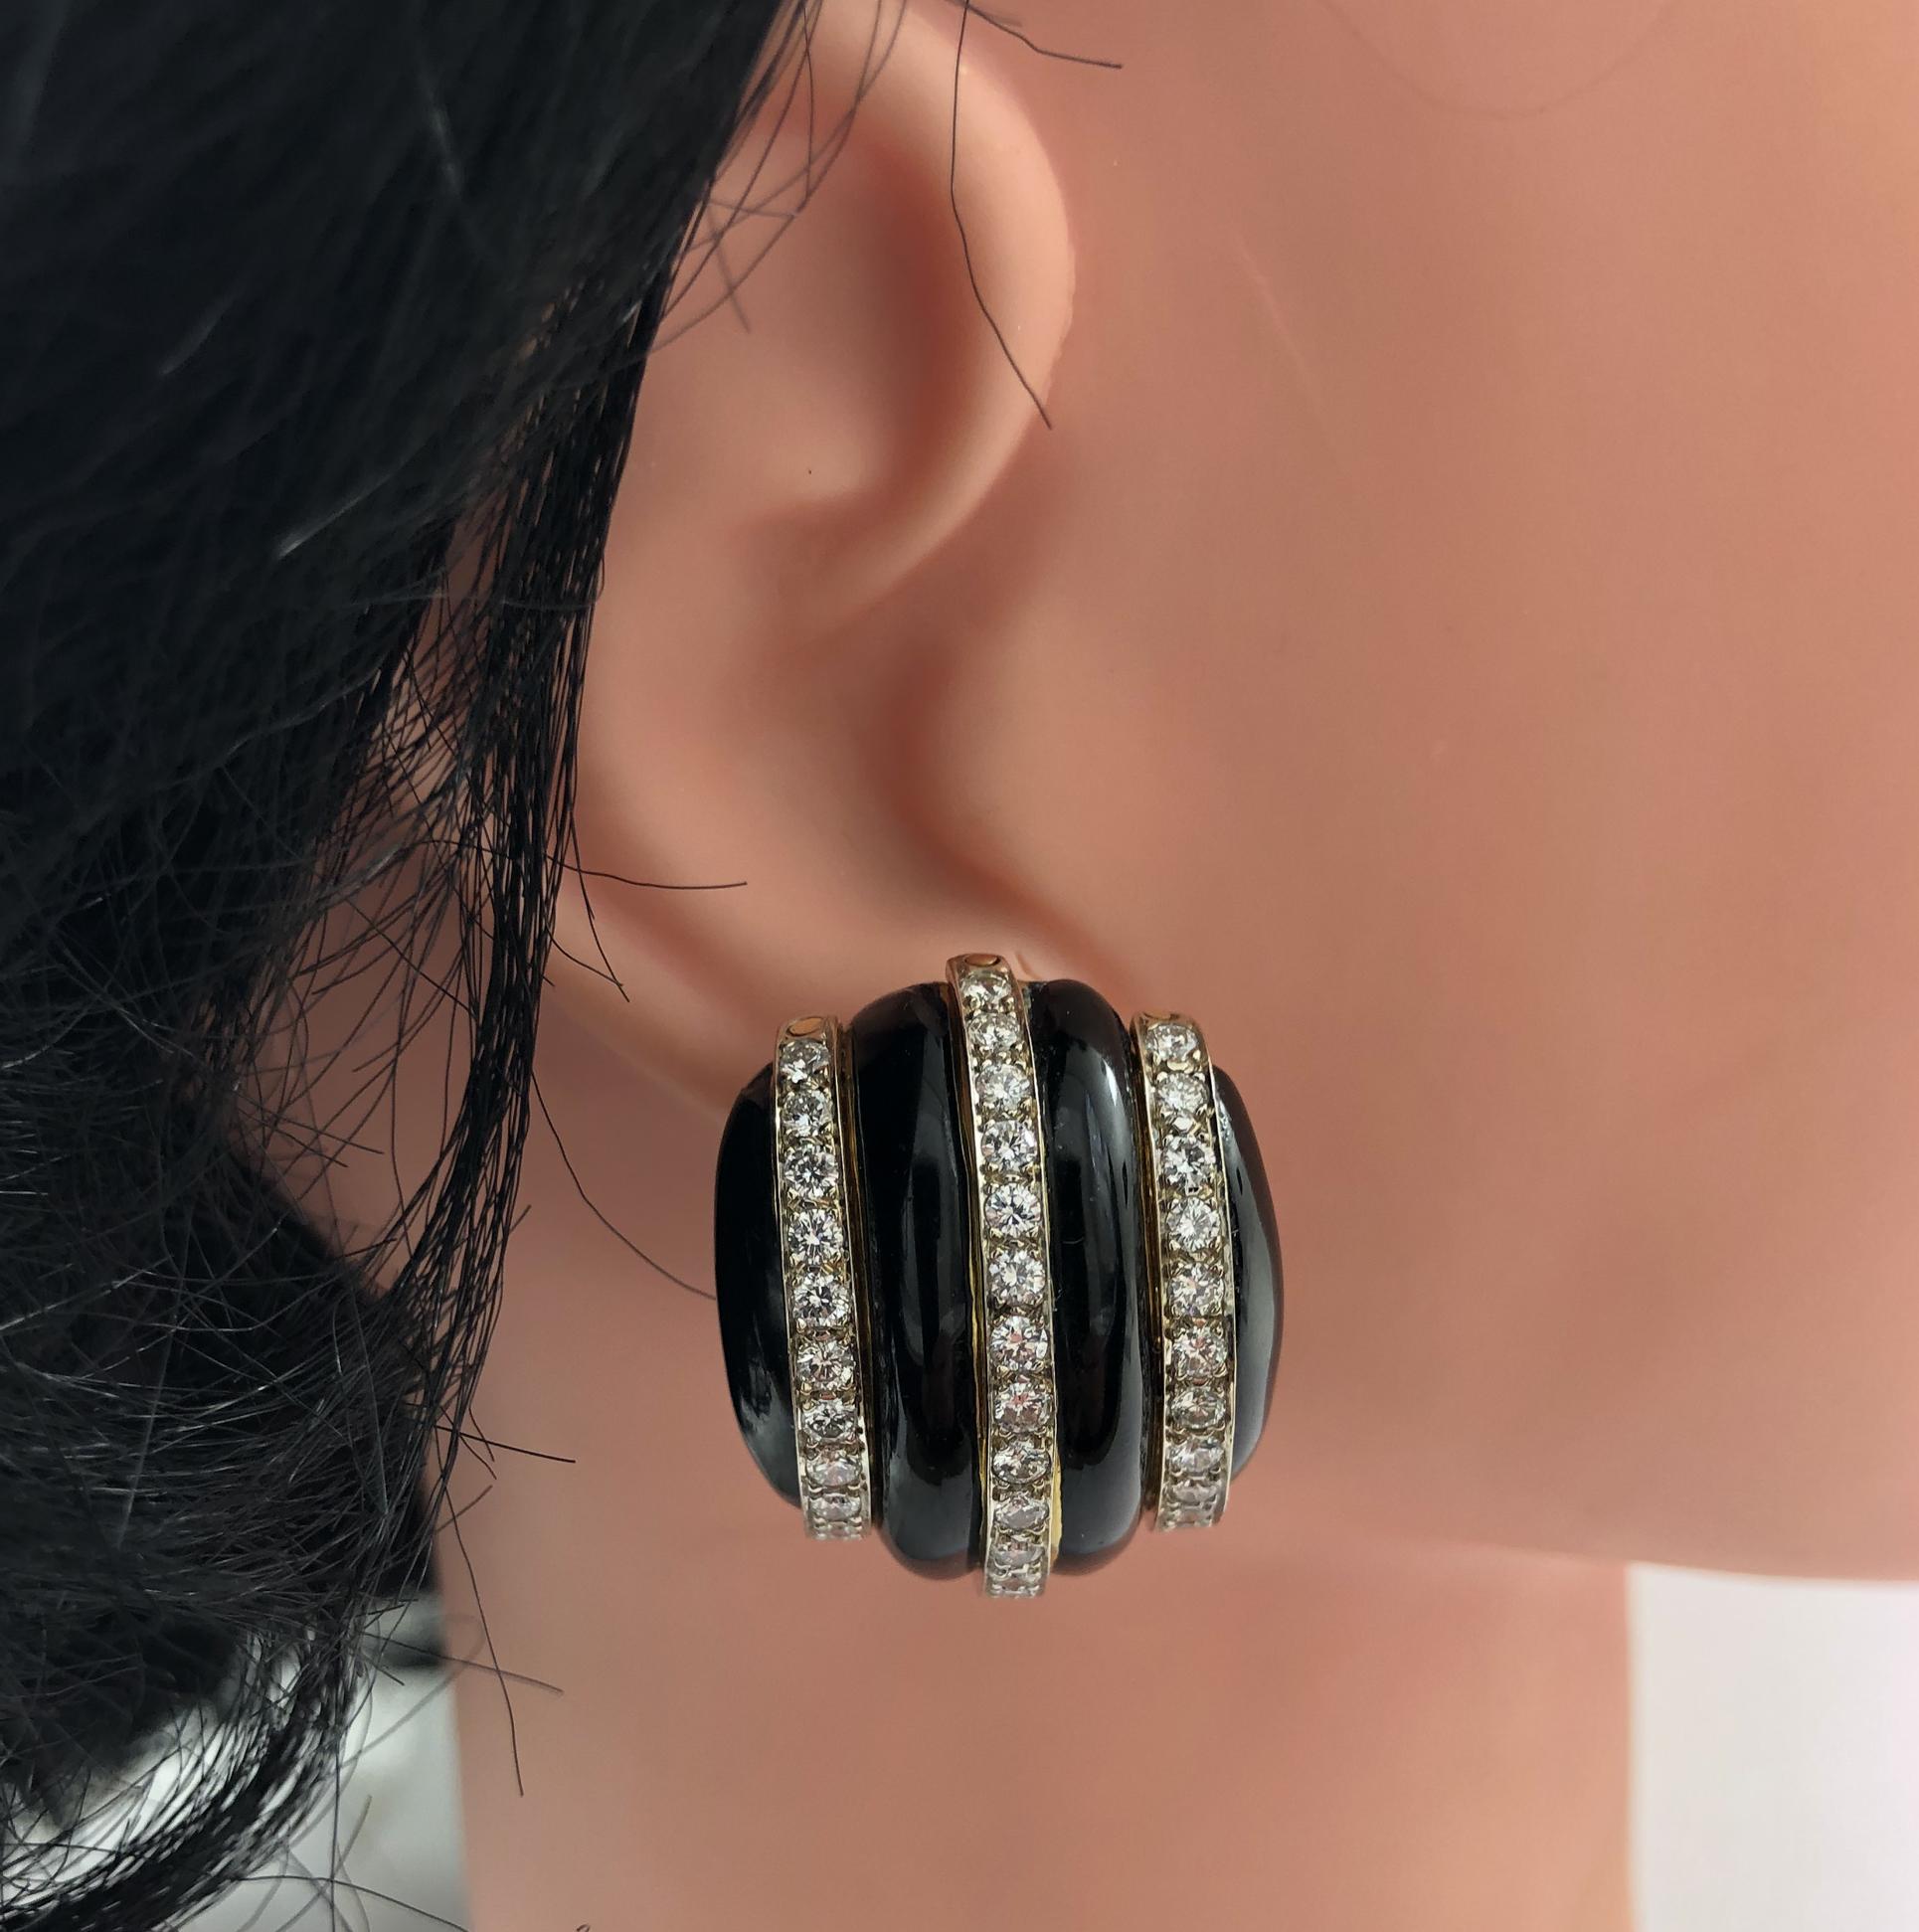 A pair of 18K yellow gold earrings, beautifully enameled in black, and each earring features 3 rows of diamonds. Designed by Boris LeBeau, these elegant earrings measure 1 3/8 inches long, and 1 inch wide. There are a total of 80 round brilliant cut